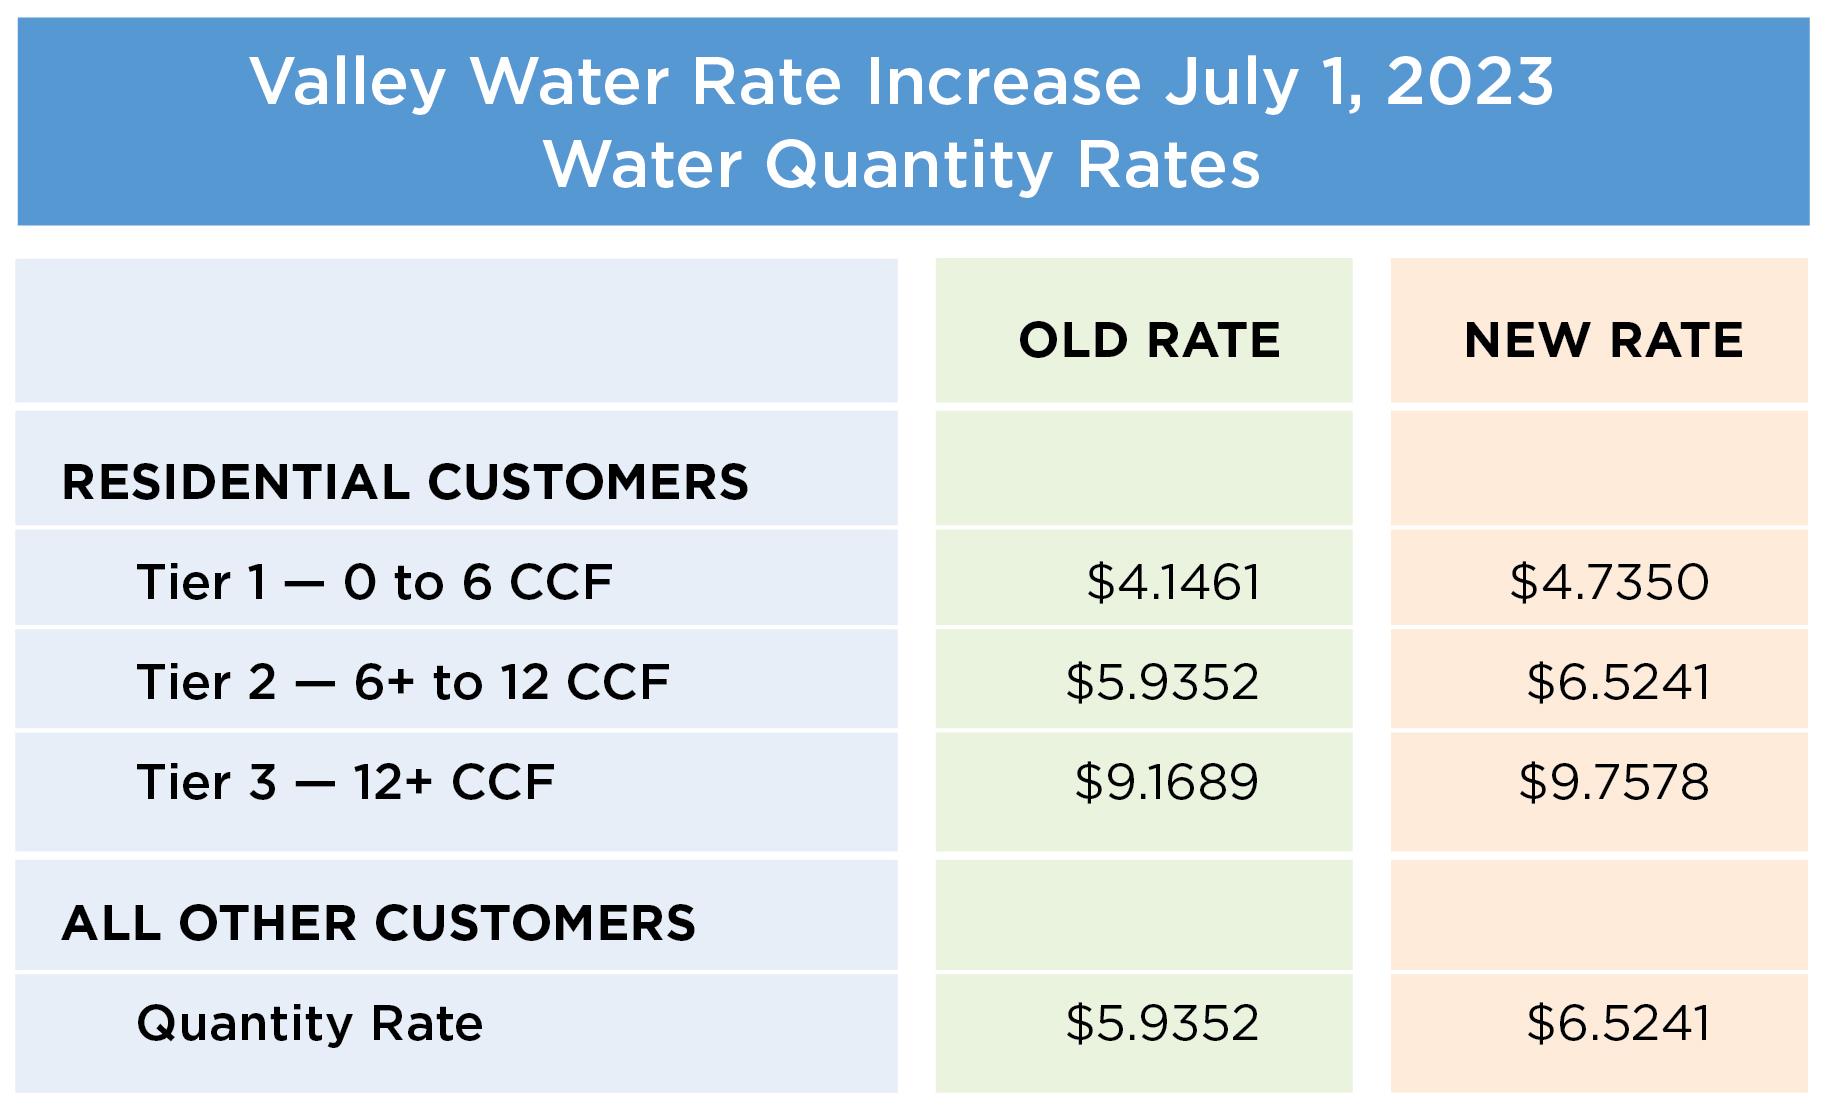 Valley Water Rate Increase Chart showing Water Quantity Rate Differences